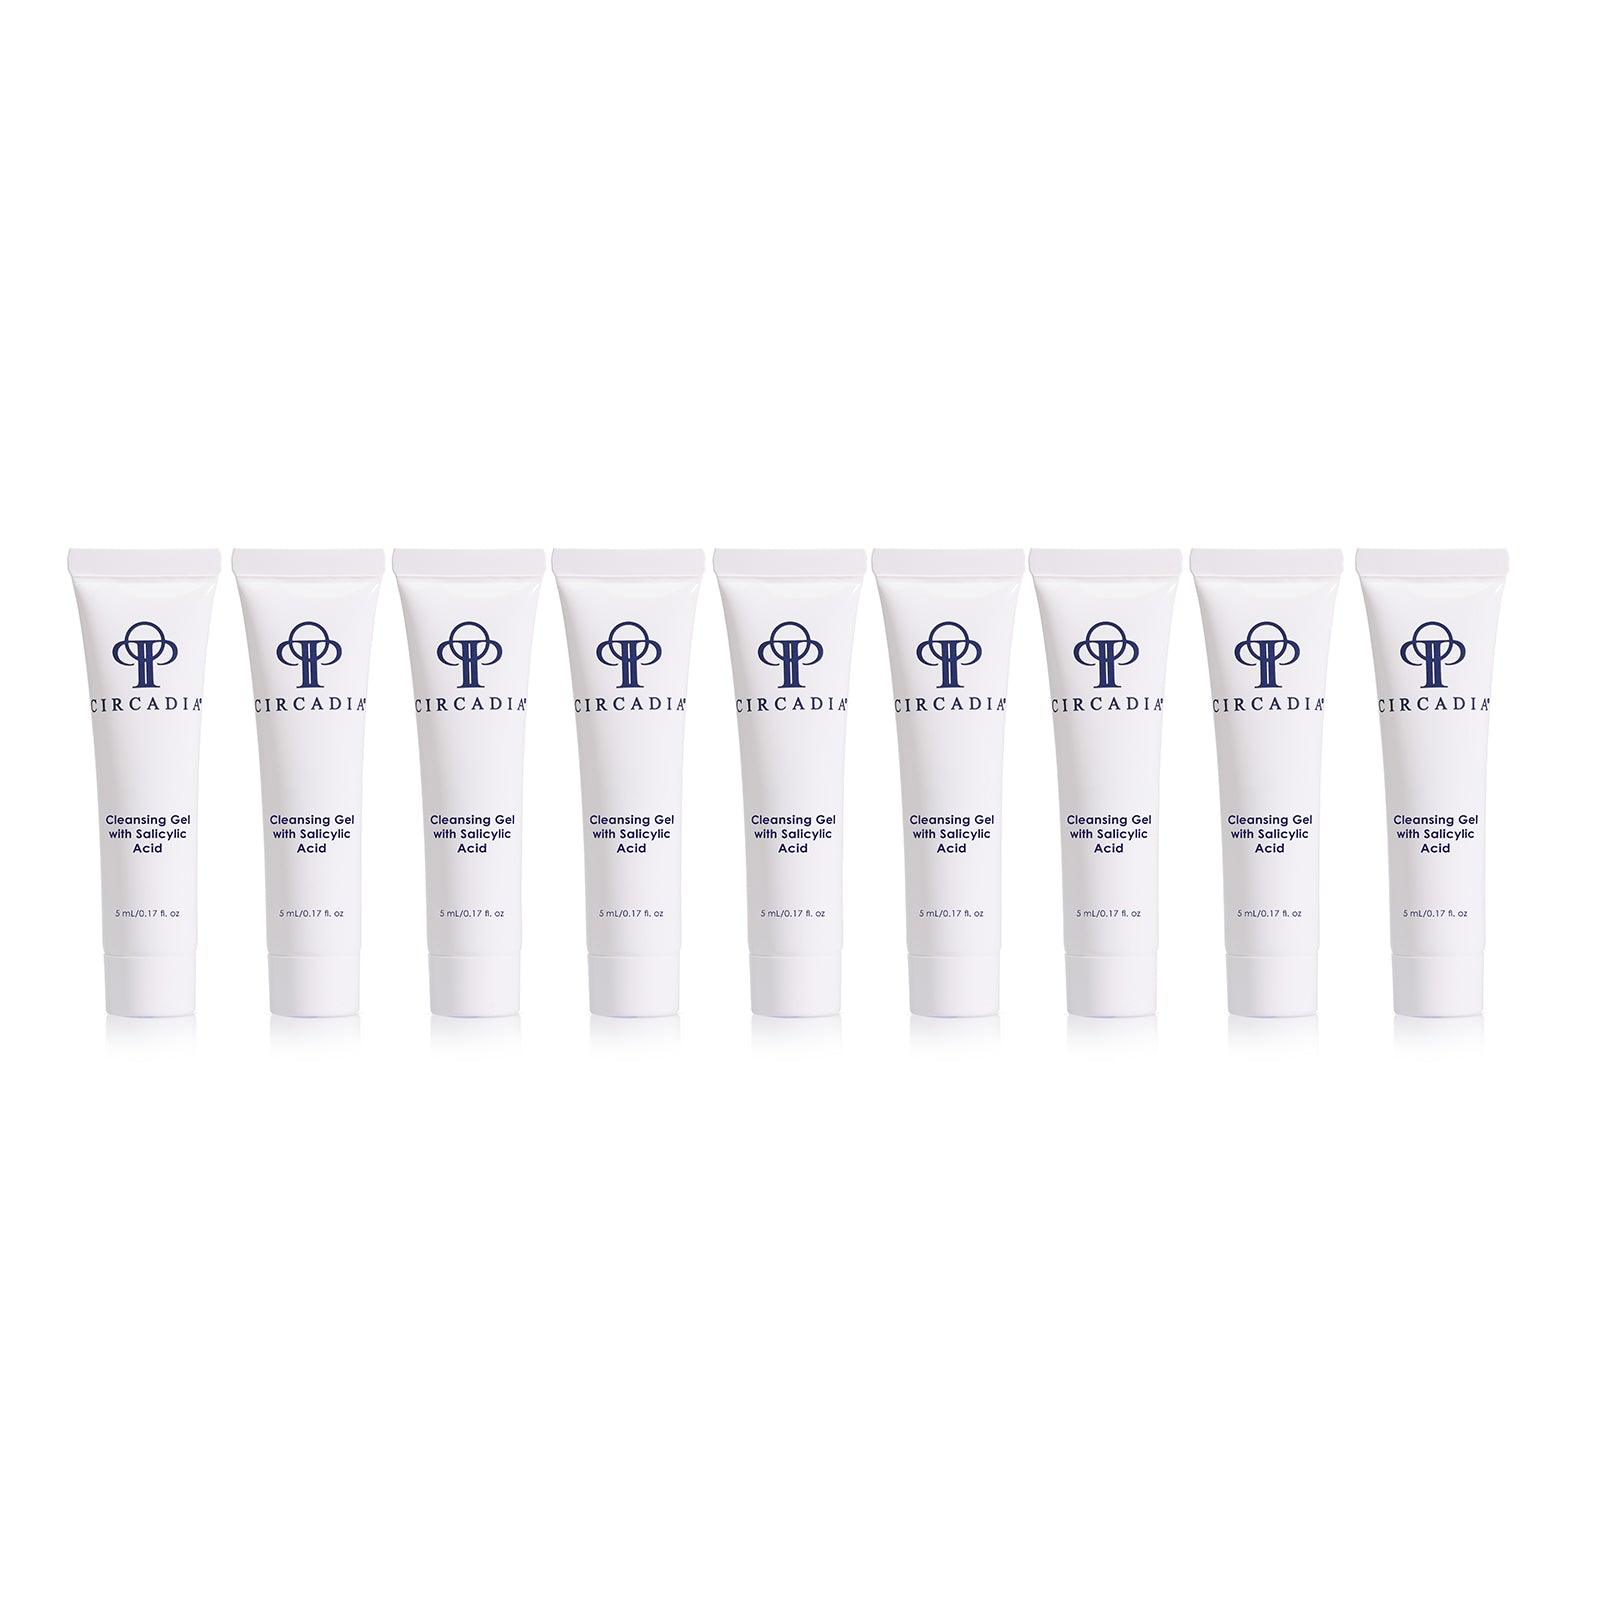 Cleansing Gel with Salicylic Acid, 5 mL, Sample (10 pack) - CIRCADIA